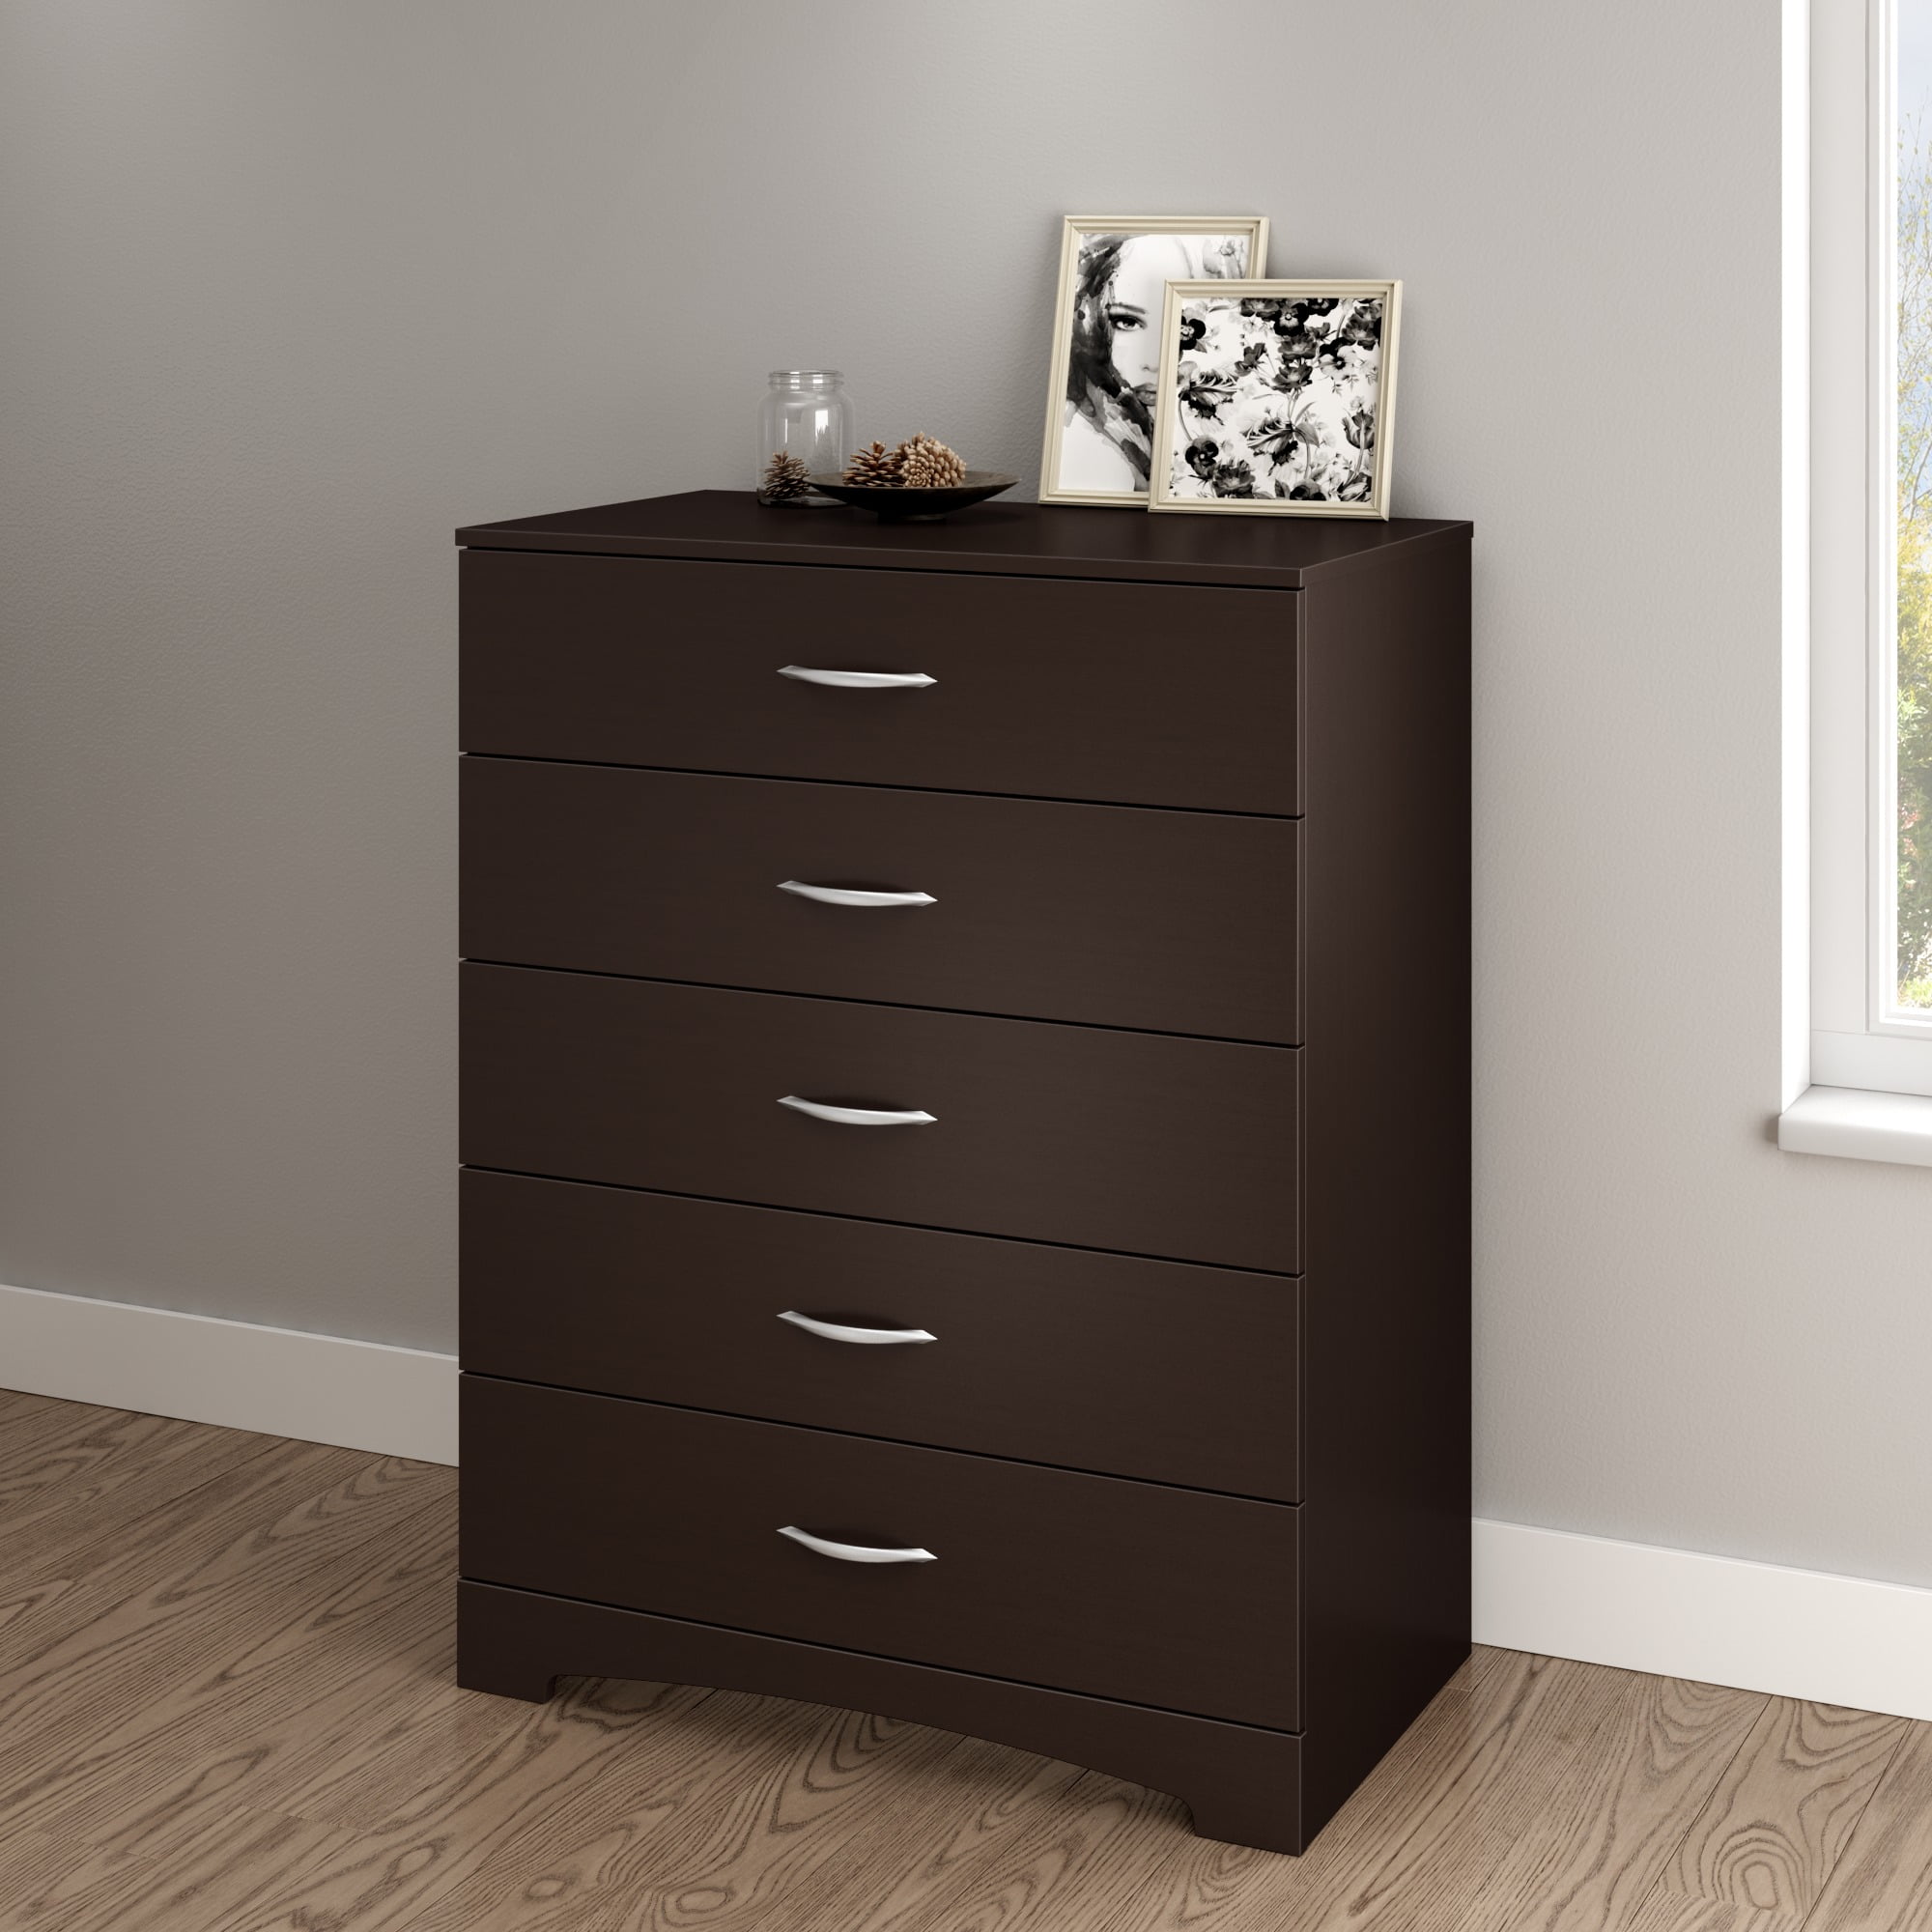 South Shore SoHo 5Drawer Chest, Chocolate